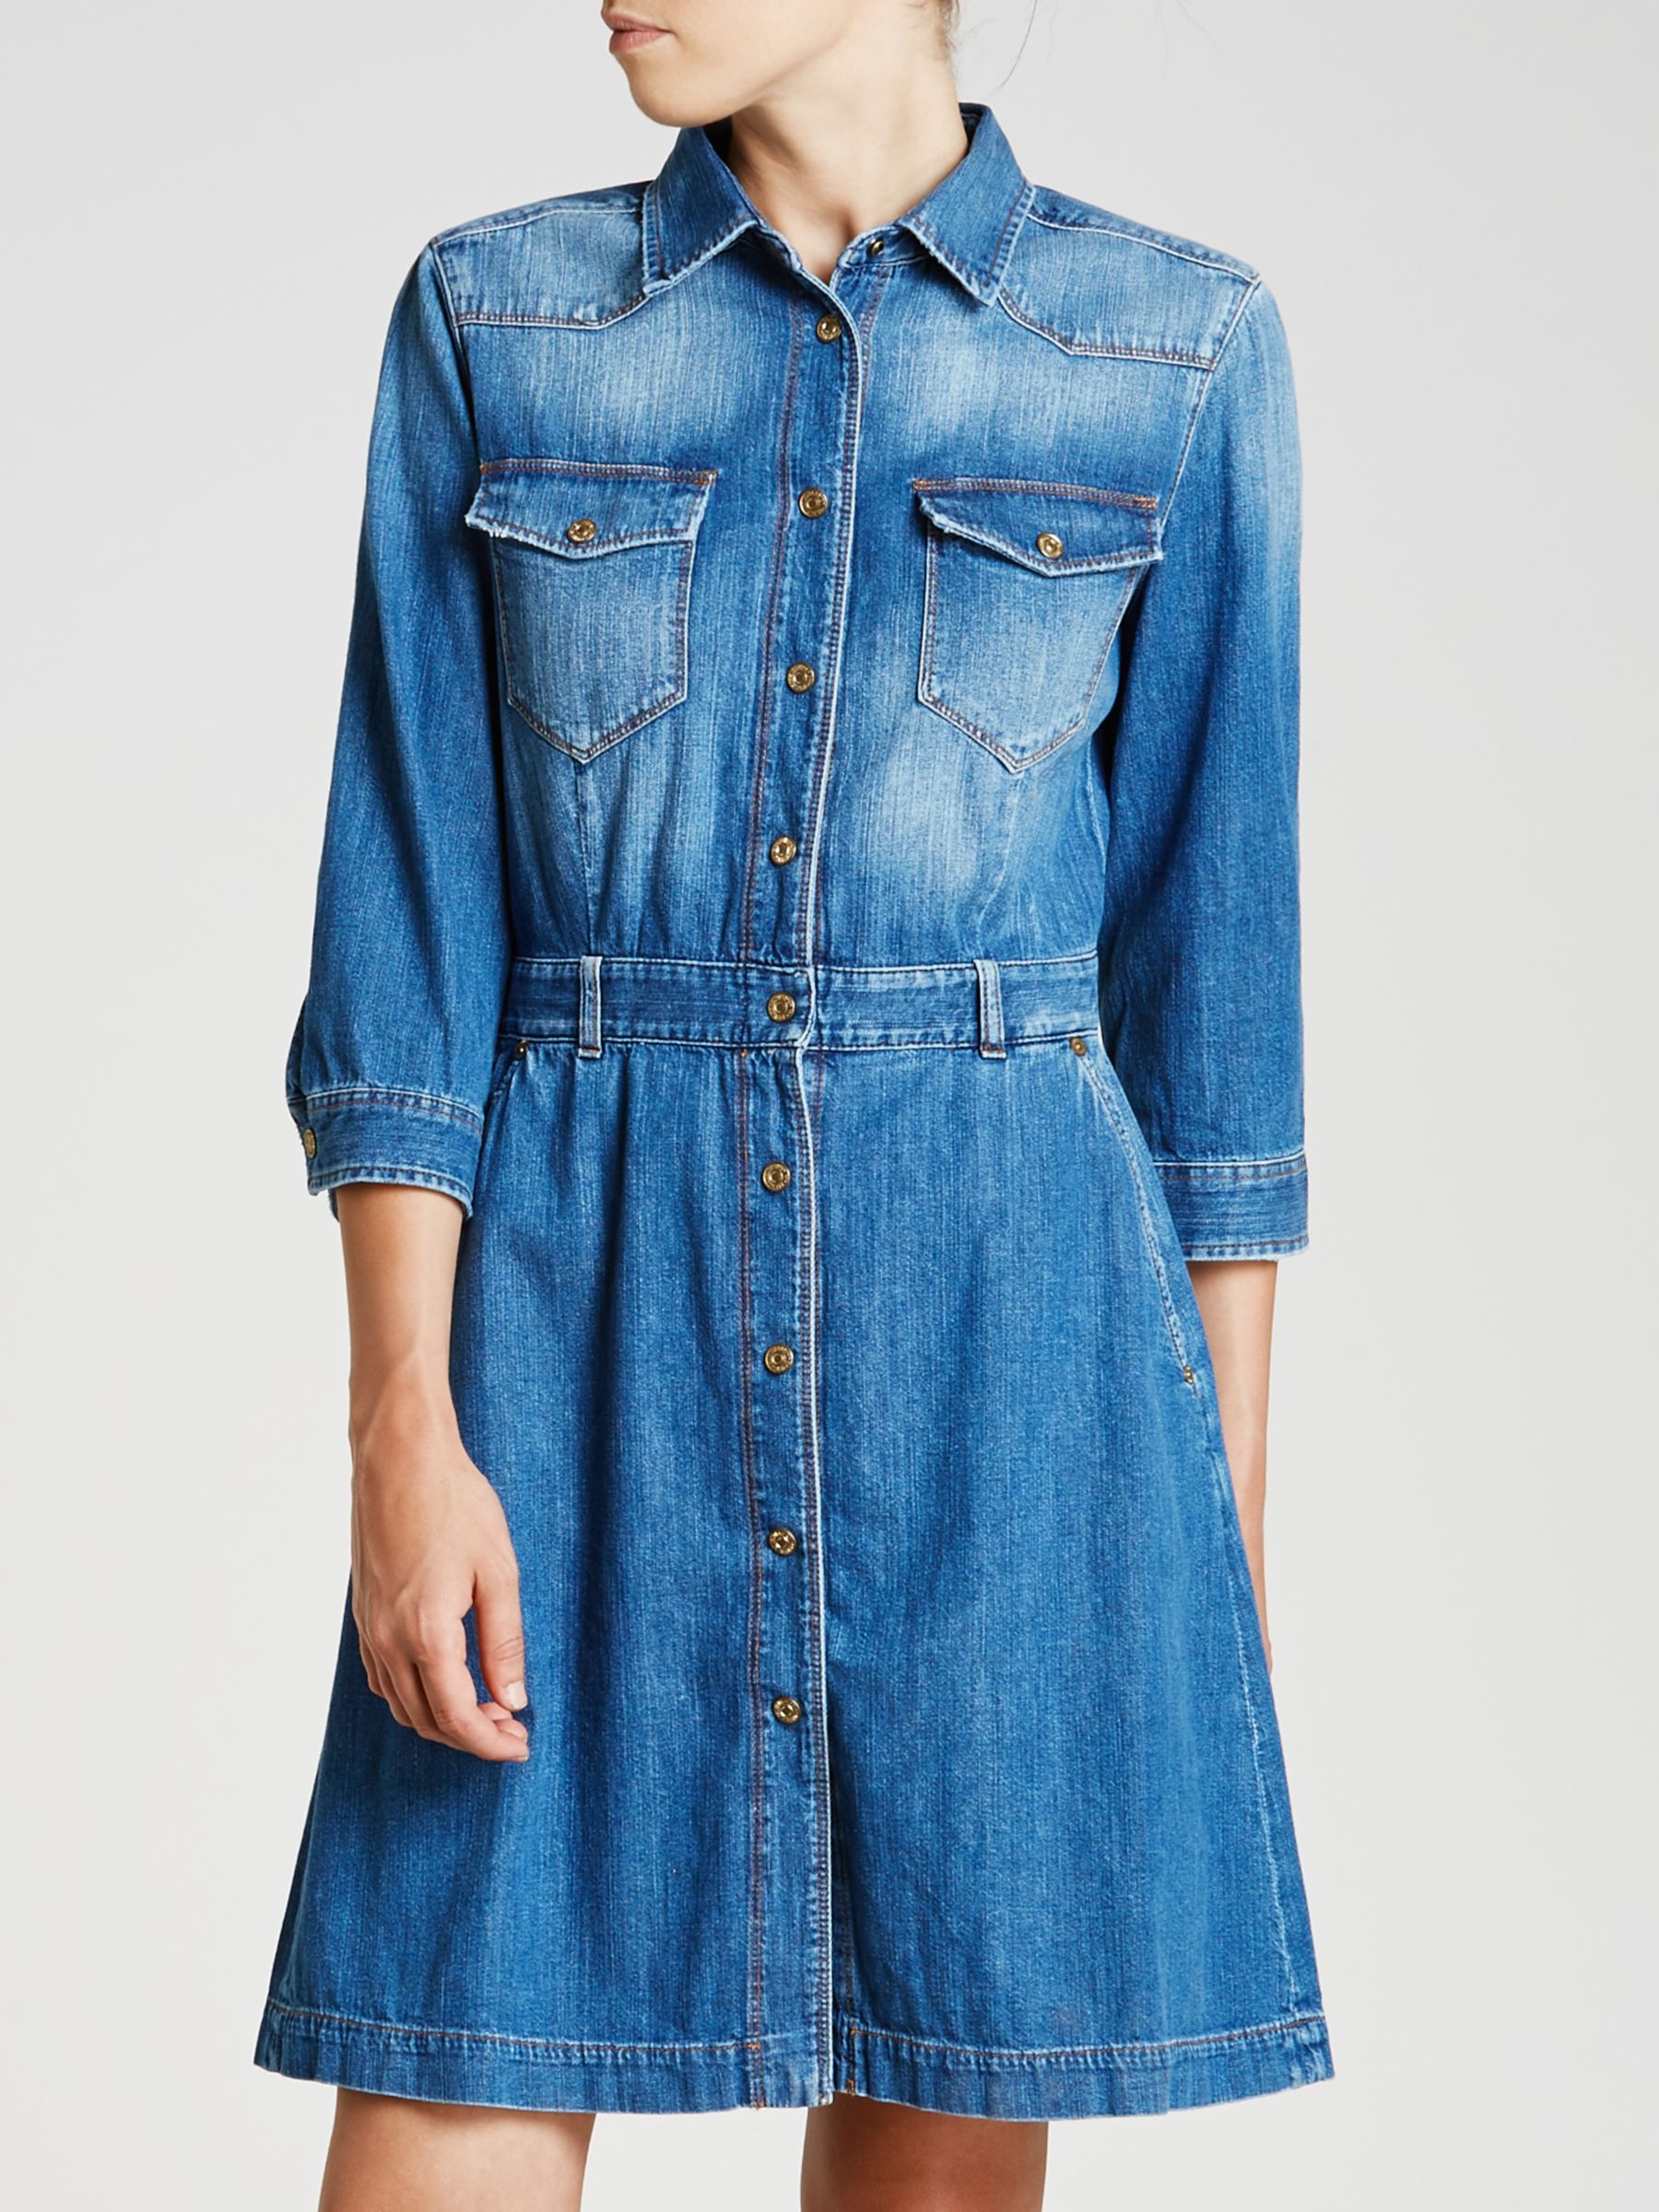 7 for all mankind dress